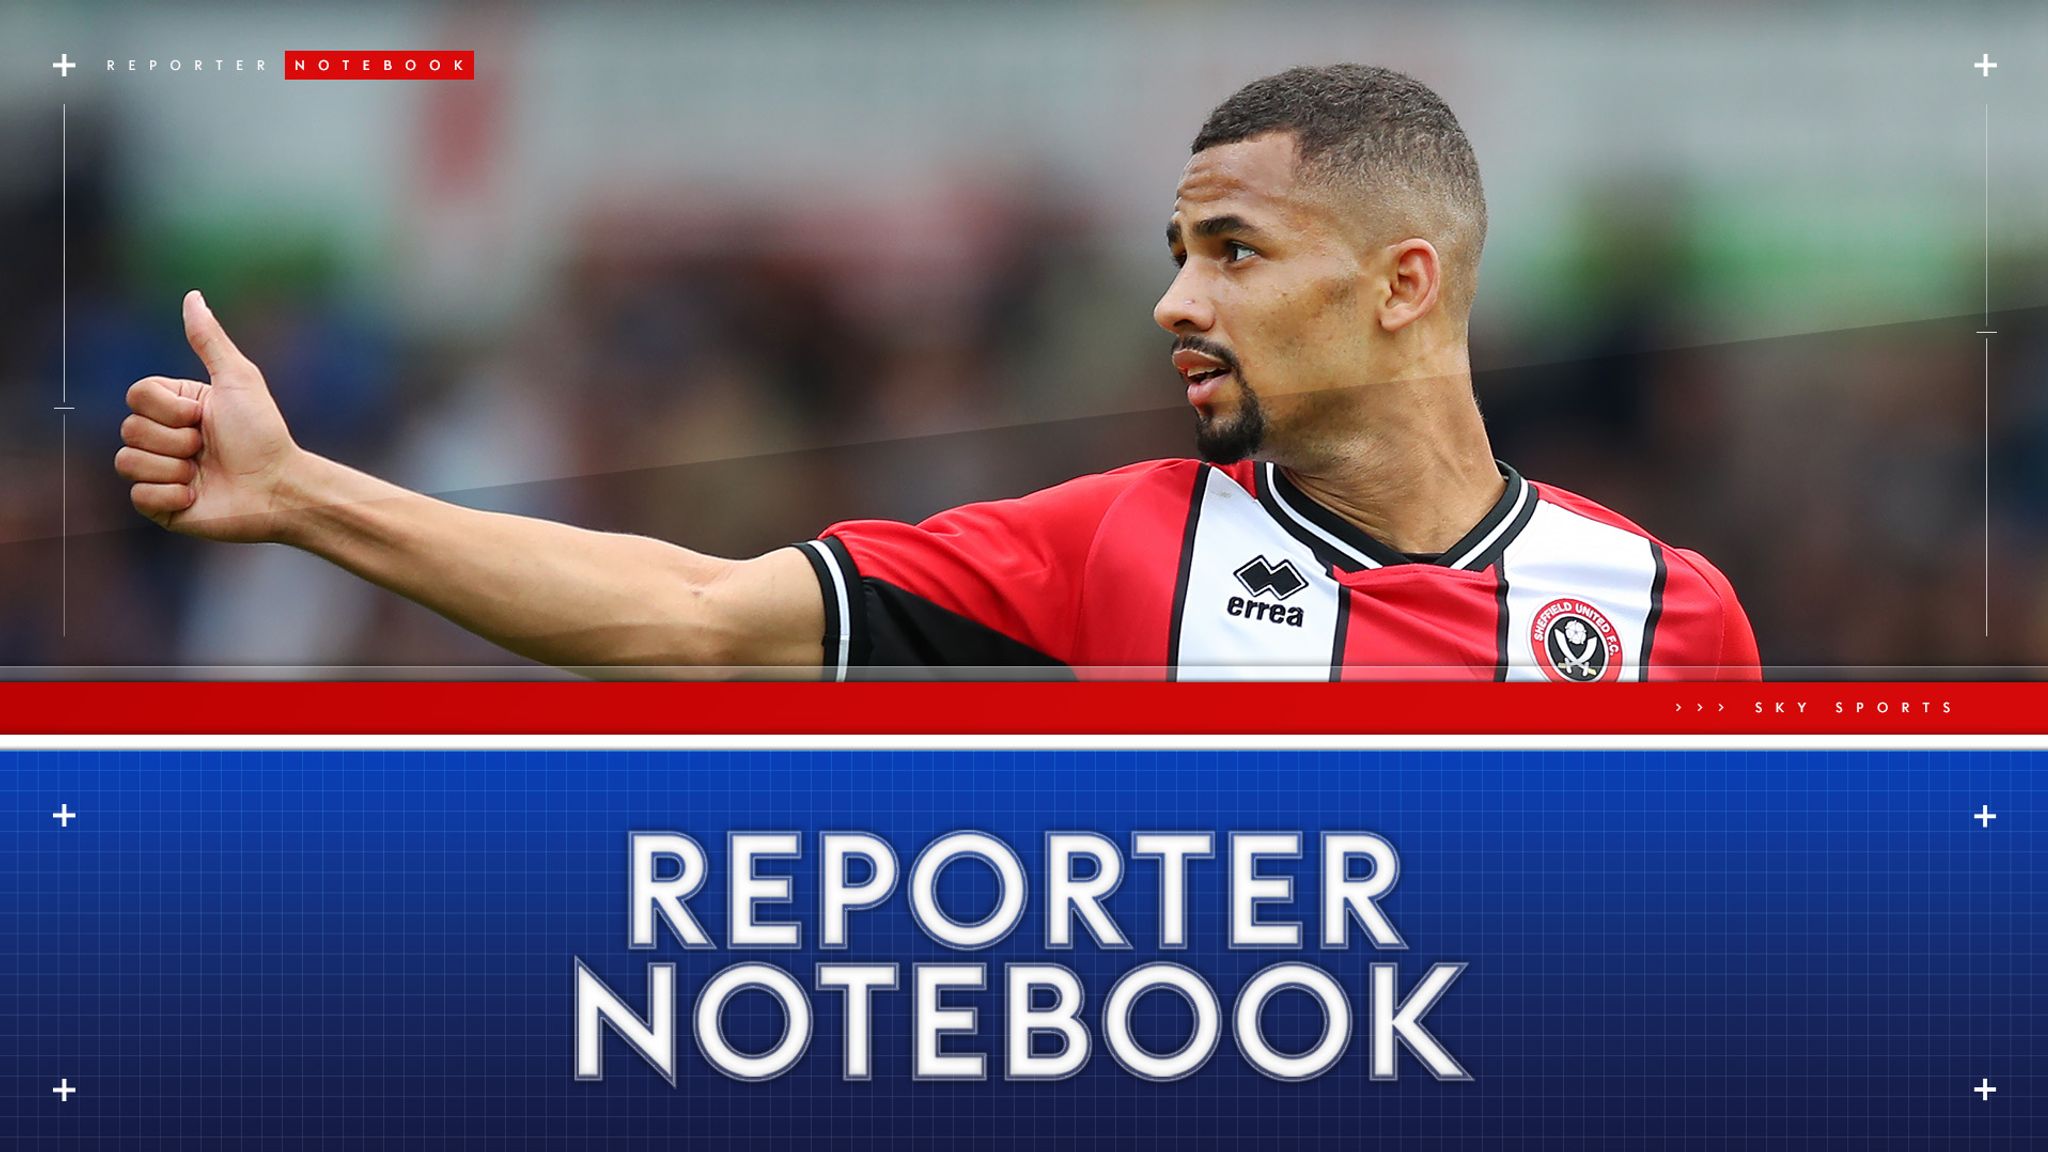 Sheffield United reporter notebook: Iliman Ndiaye contract, hard graft and  team spirit - would that keep the Blades up? | Football News | Sky Sports